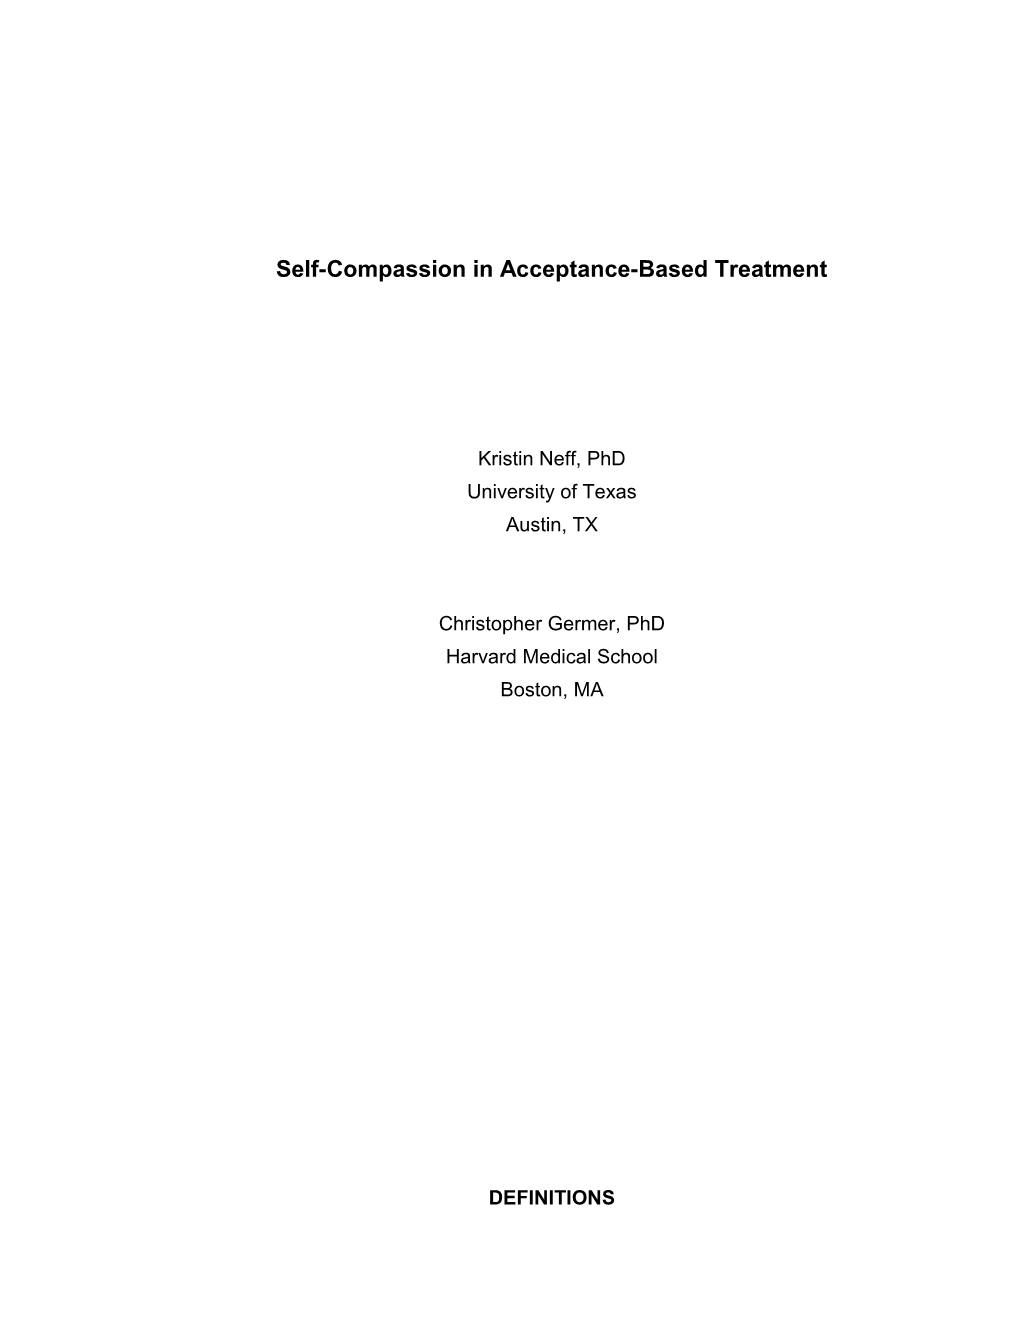 Self-Compassion in Acceptance-Based Treatment